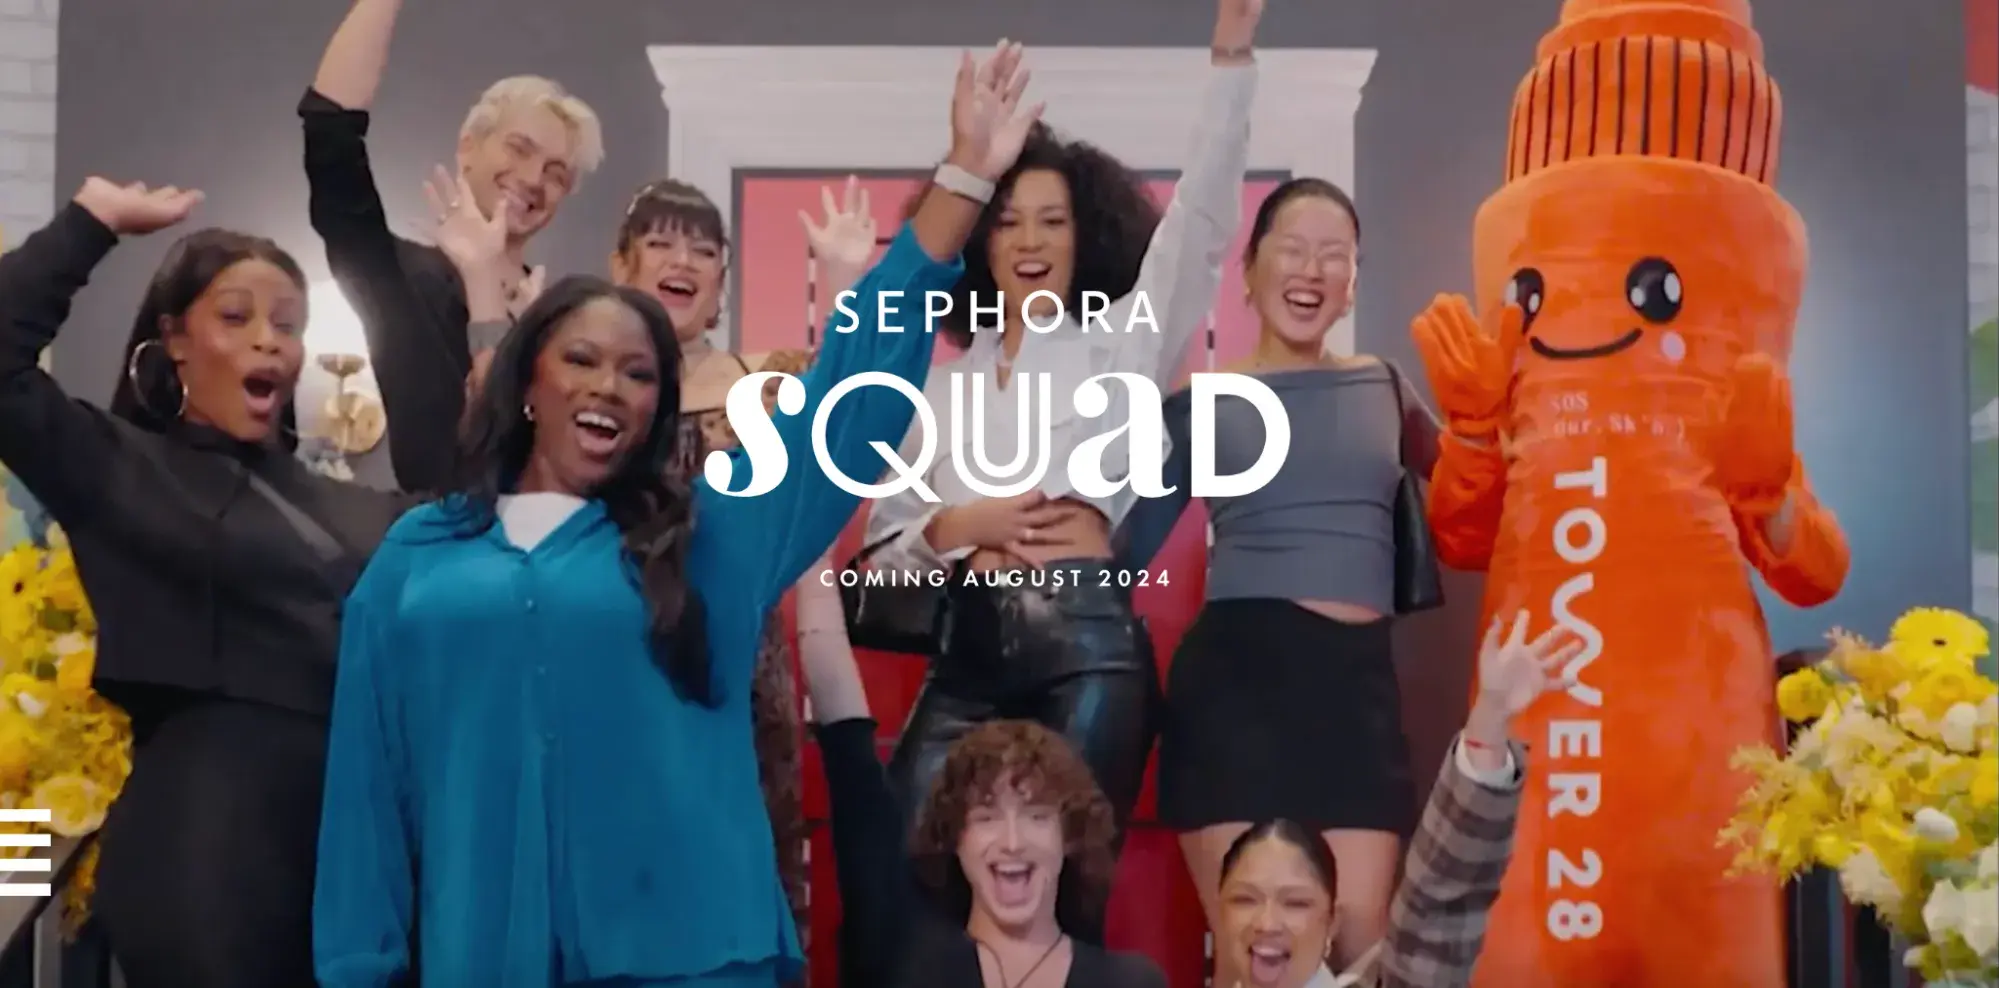 types of community management, acquisition community example, Sephora Squad homepage